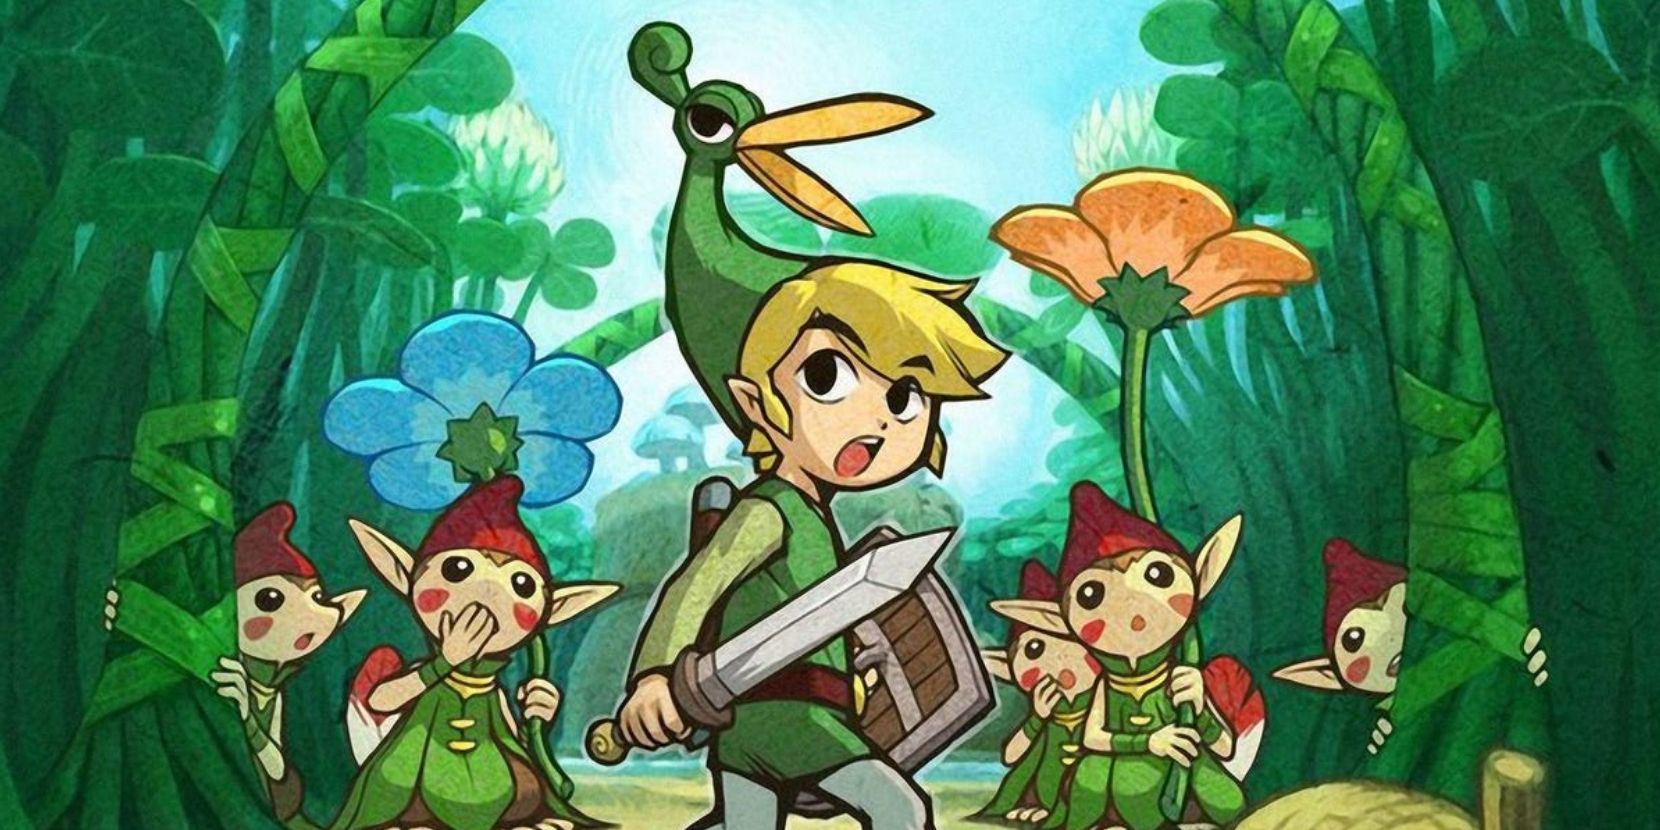 minish cap art showing Link and Minish behind him